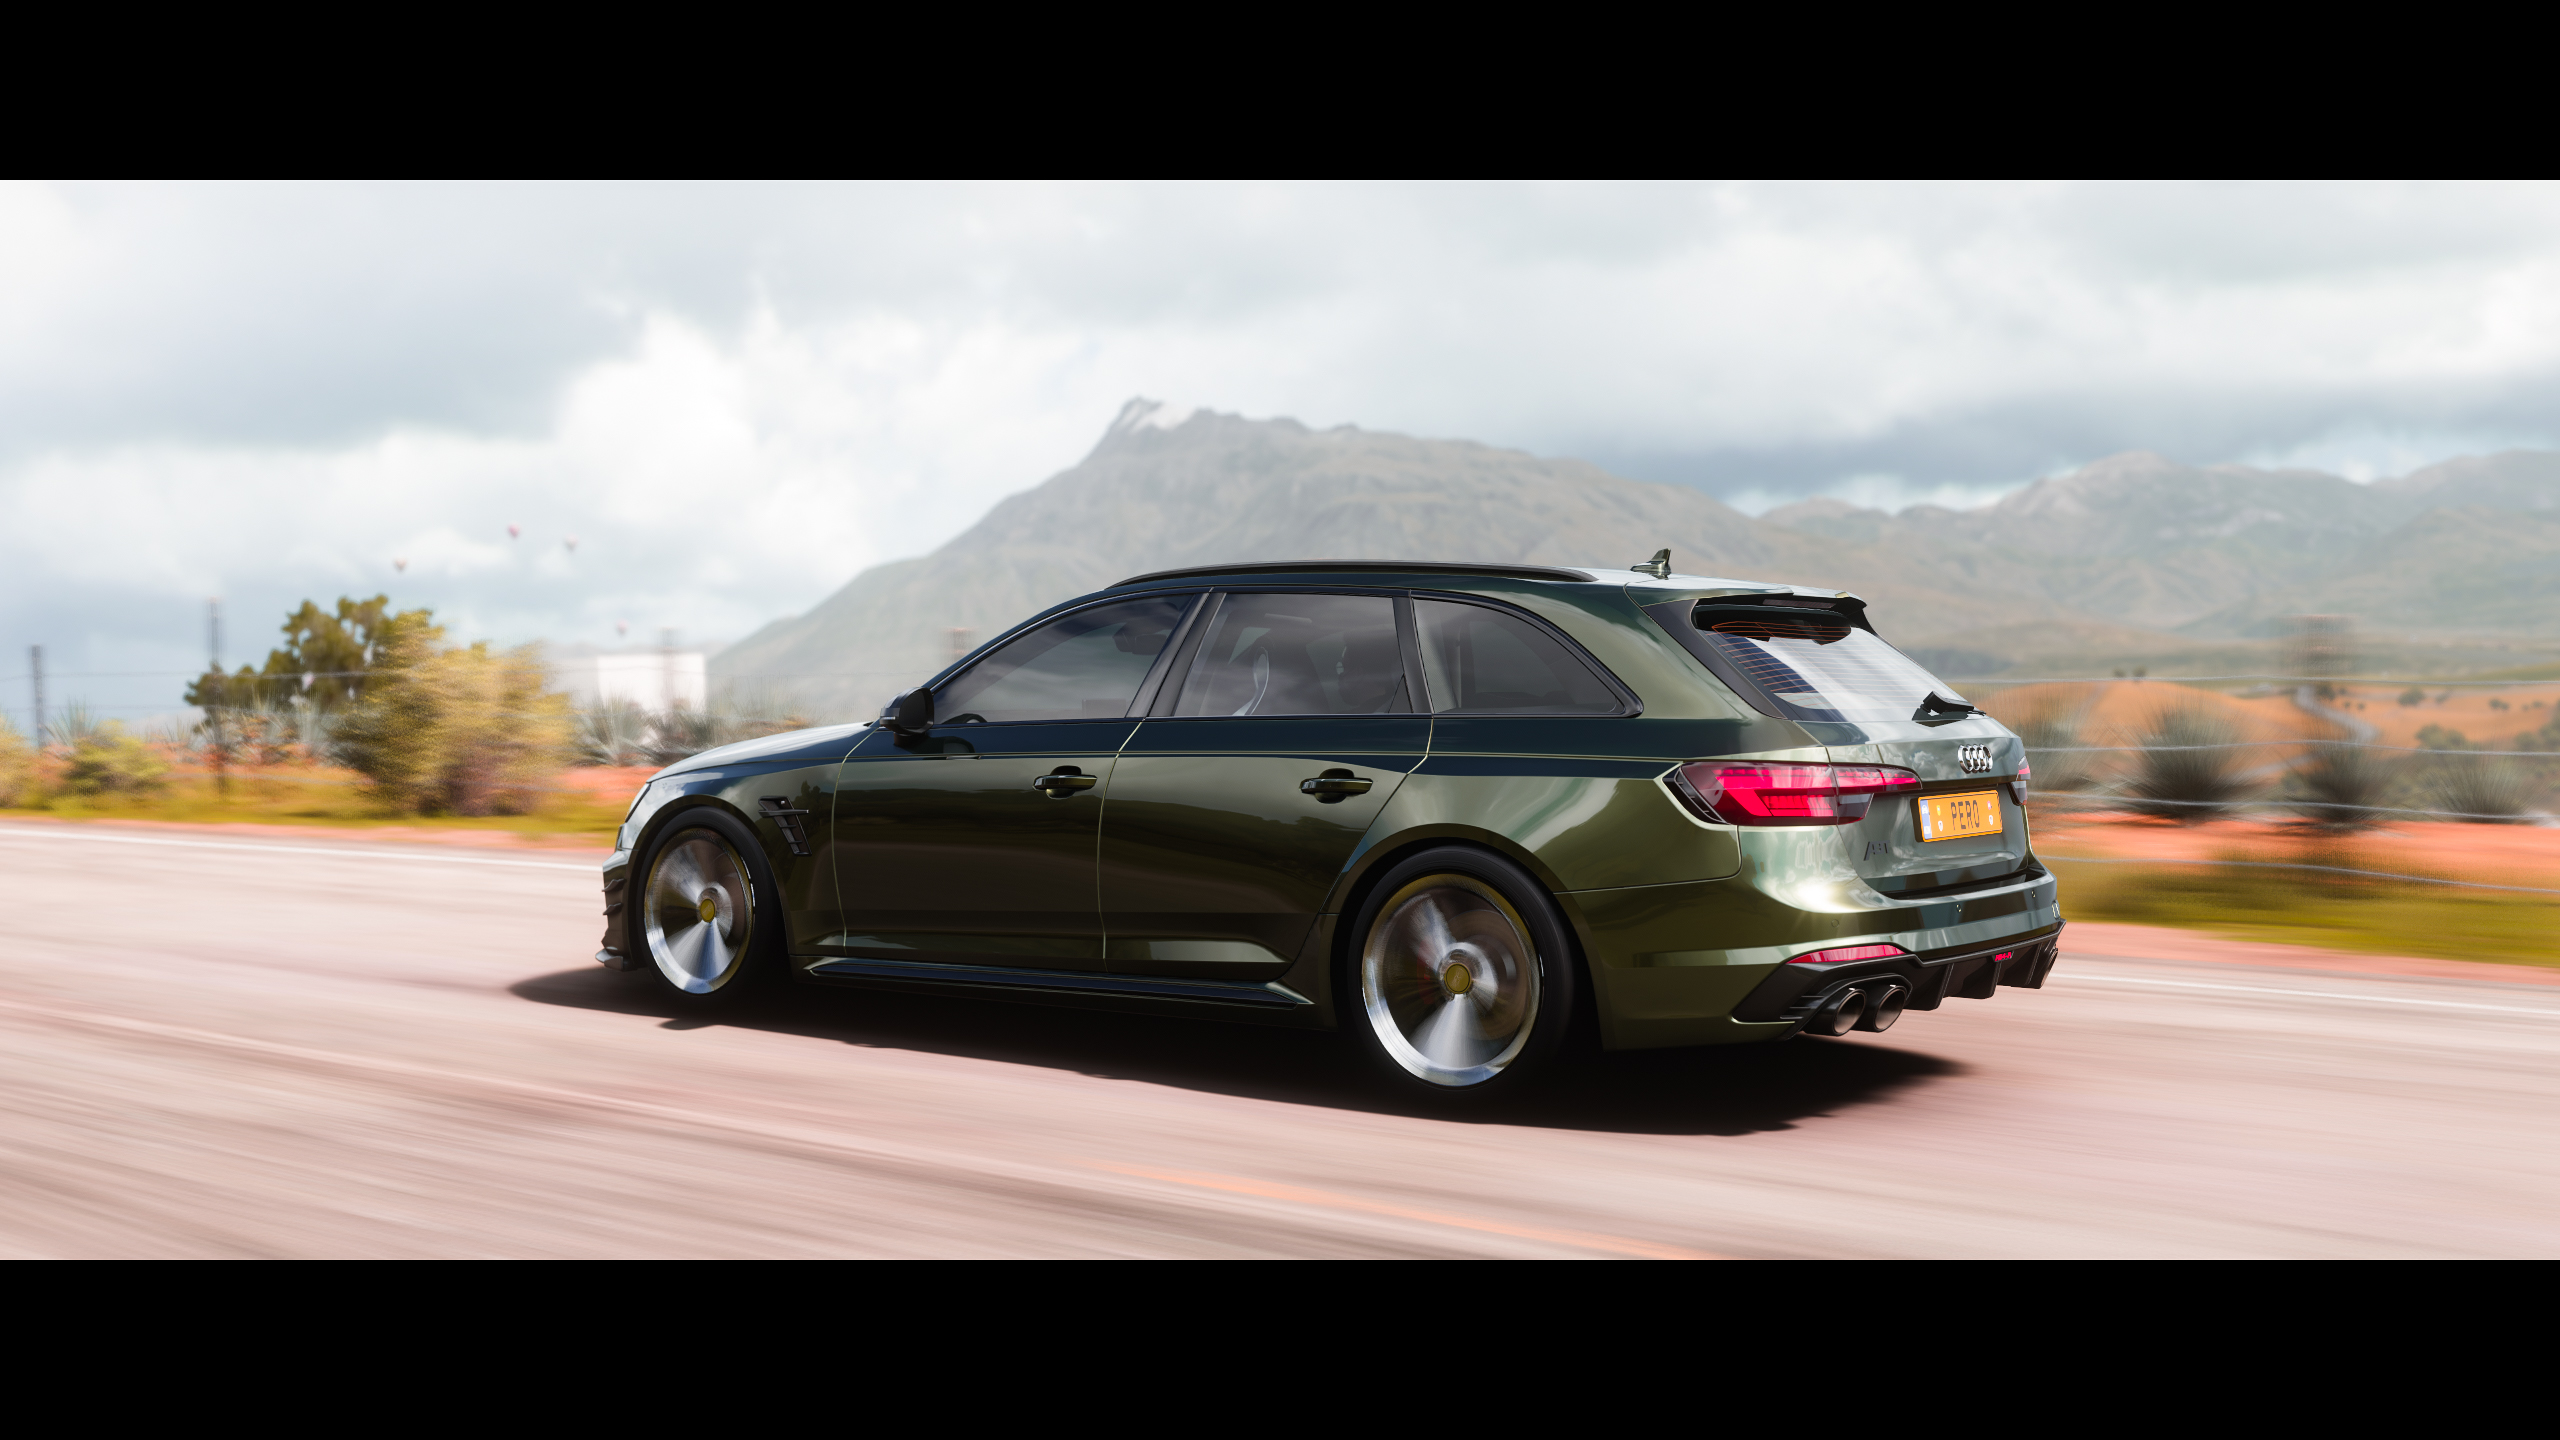 General 2560x1440 Audi Rs4 ABT Forza Forza Horizon PlaygroundGames Audi A4 video games station wagon Volkswagen Group car Avant Forza Horizon 5 German cars rear view taillights licence plates video game art screen shot